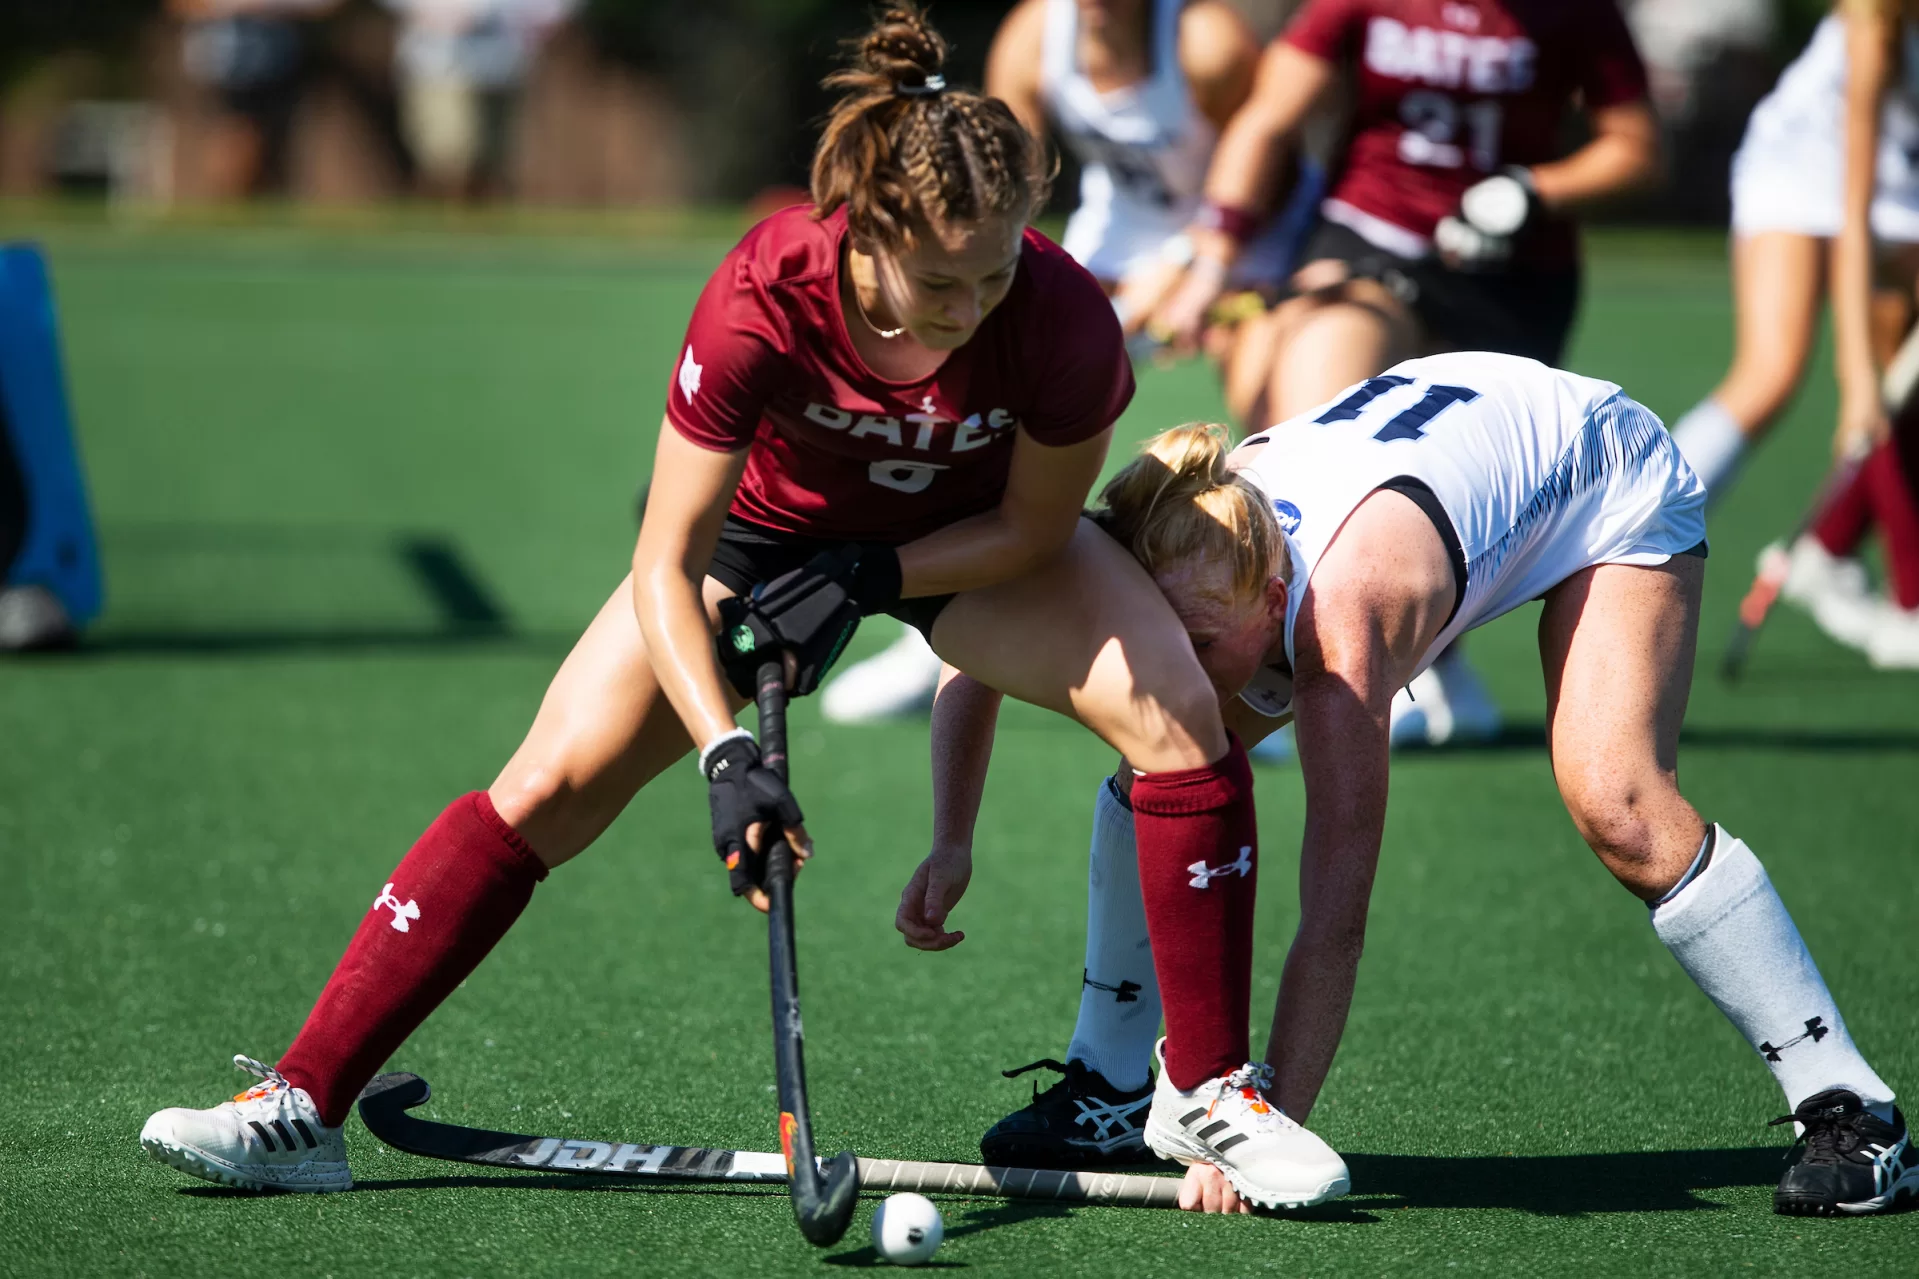 Bates College field hockey defeats Connecticut College on September 18, 2021. (Theophil Syslo | Bates College)